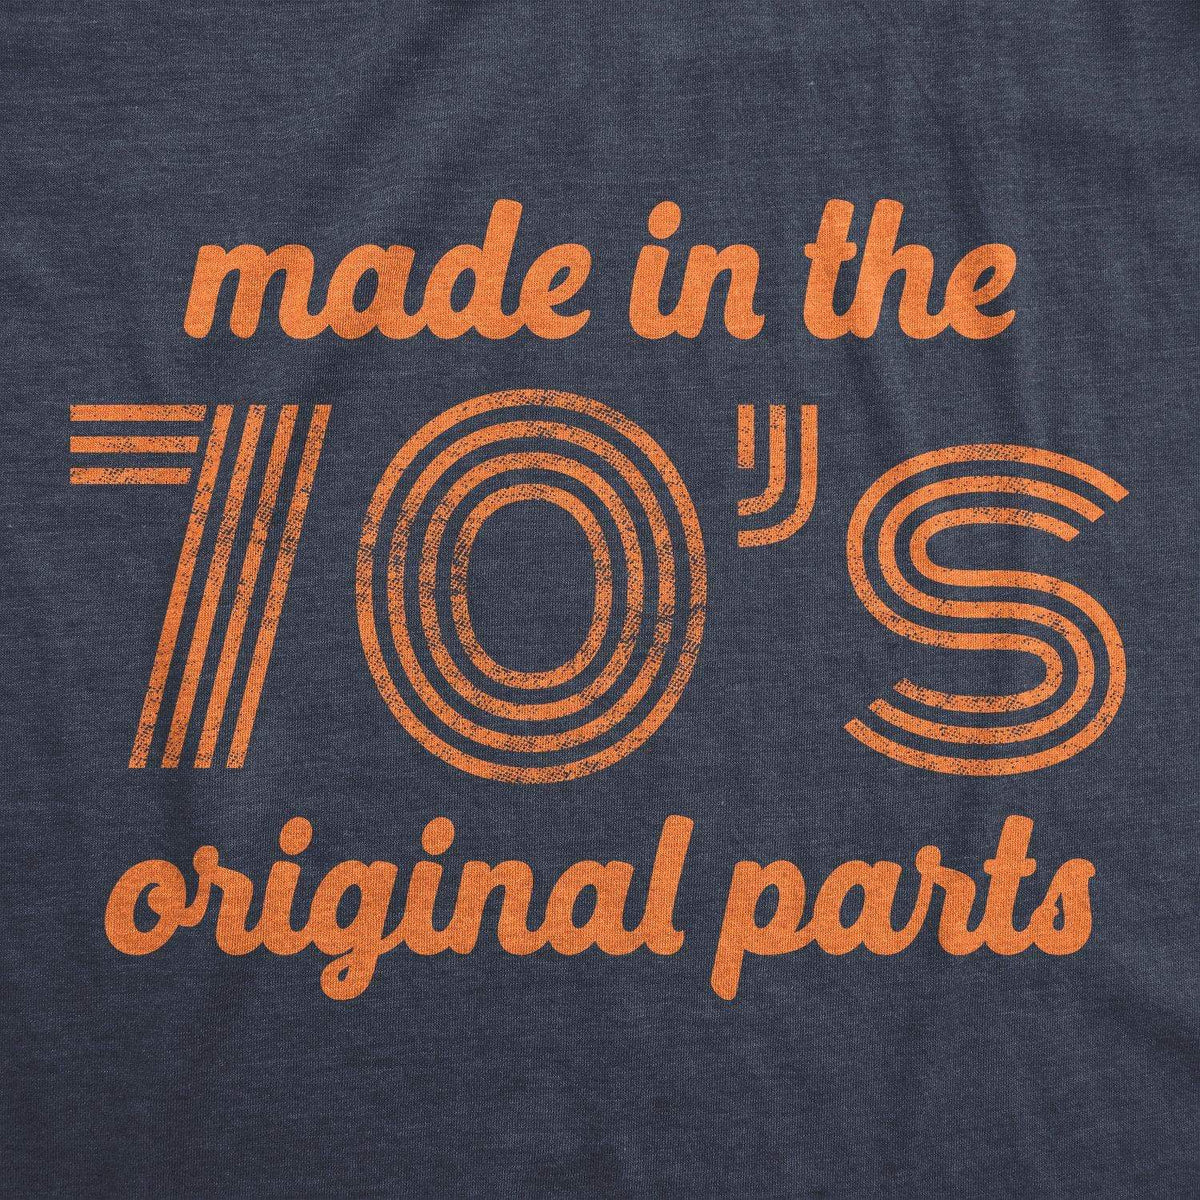 Made In The 70s Original Parts Men&#39;s Tshirt - Crazy Dog T-Shirts